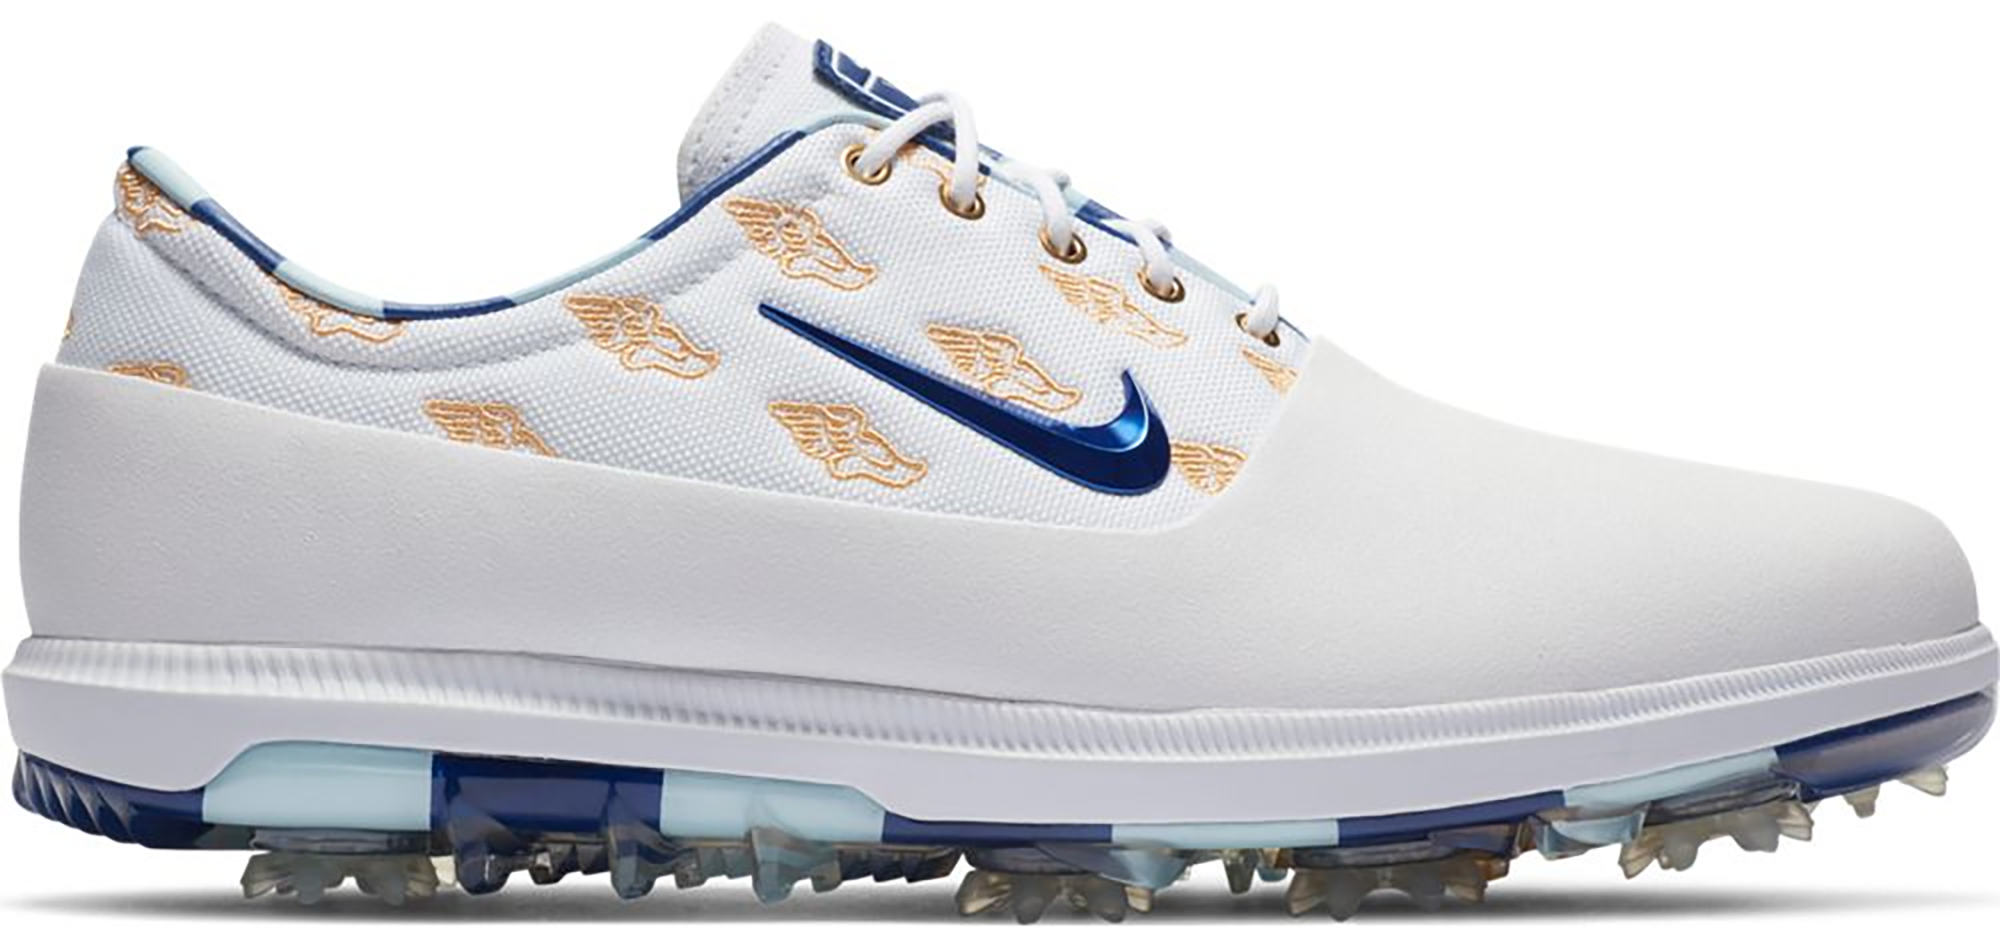 nike golf shoes stockx